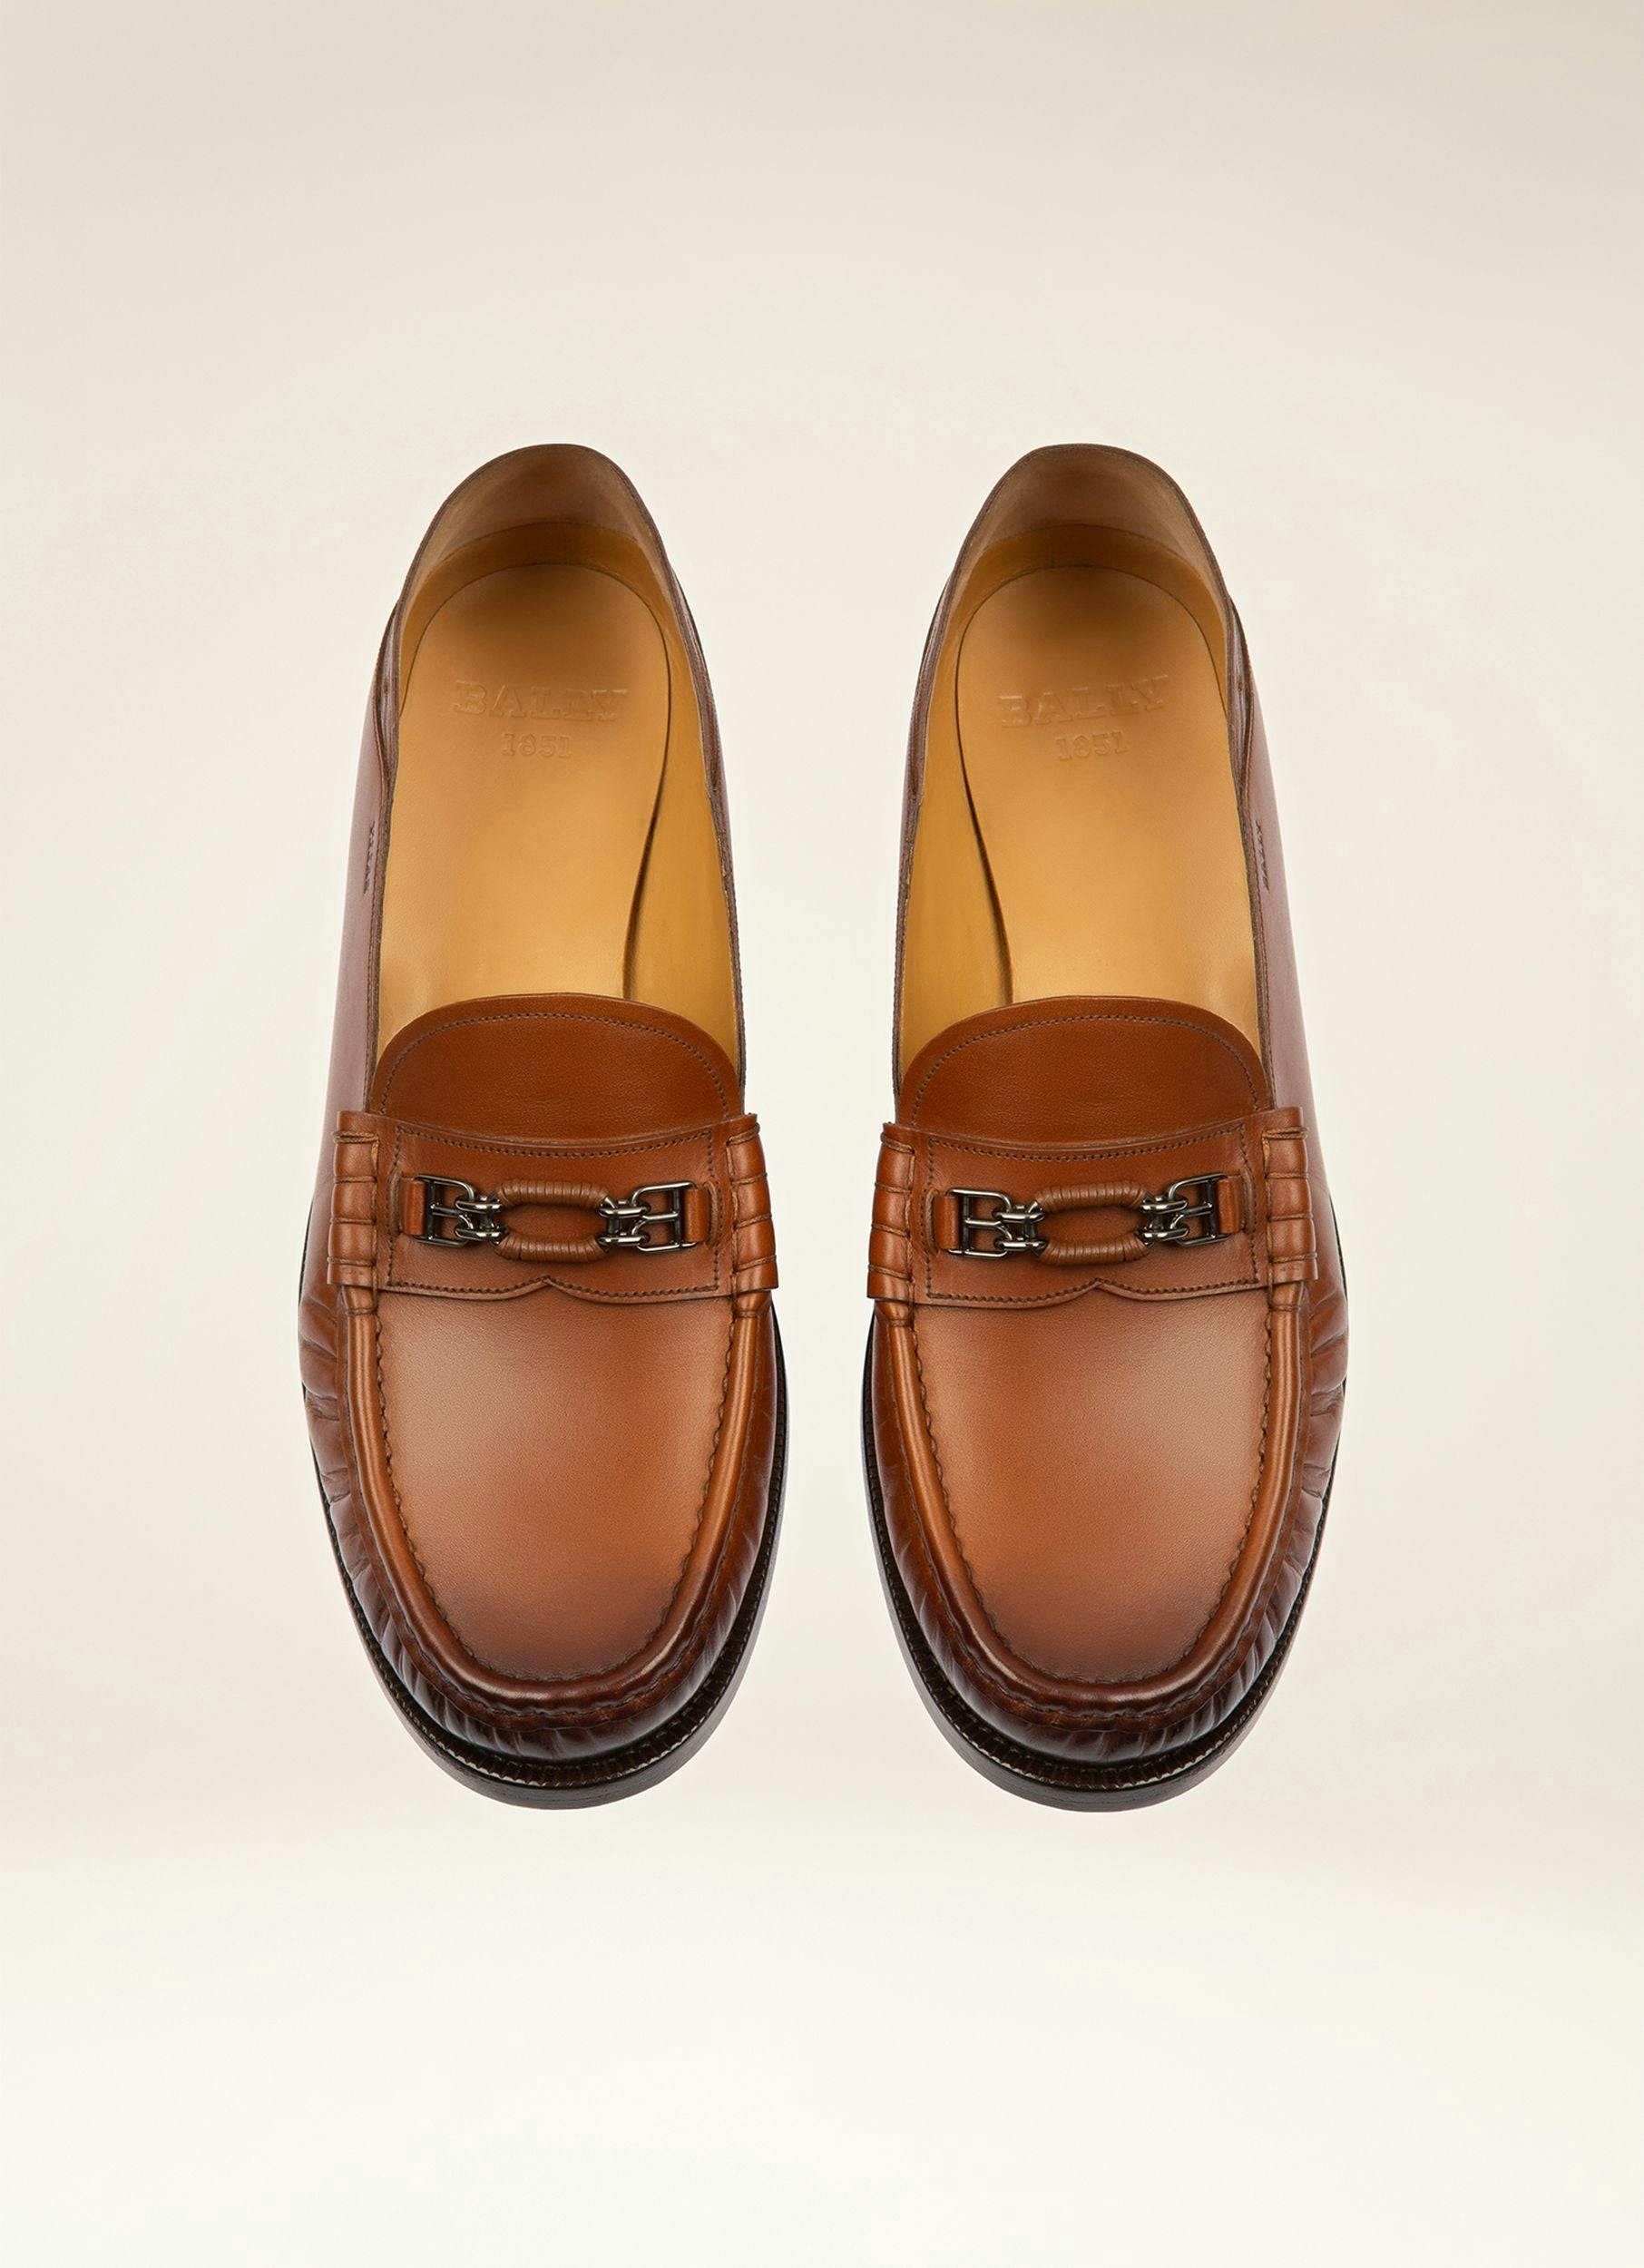 Coriano Leather Moccasins In Brown - Men's - Bally - 04